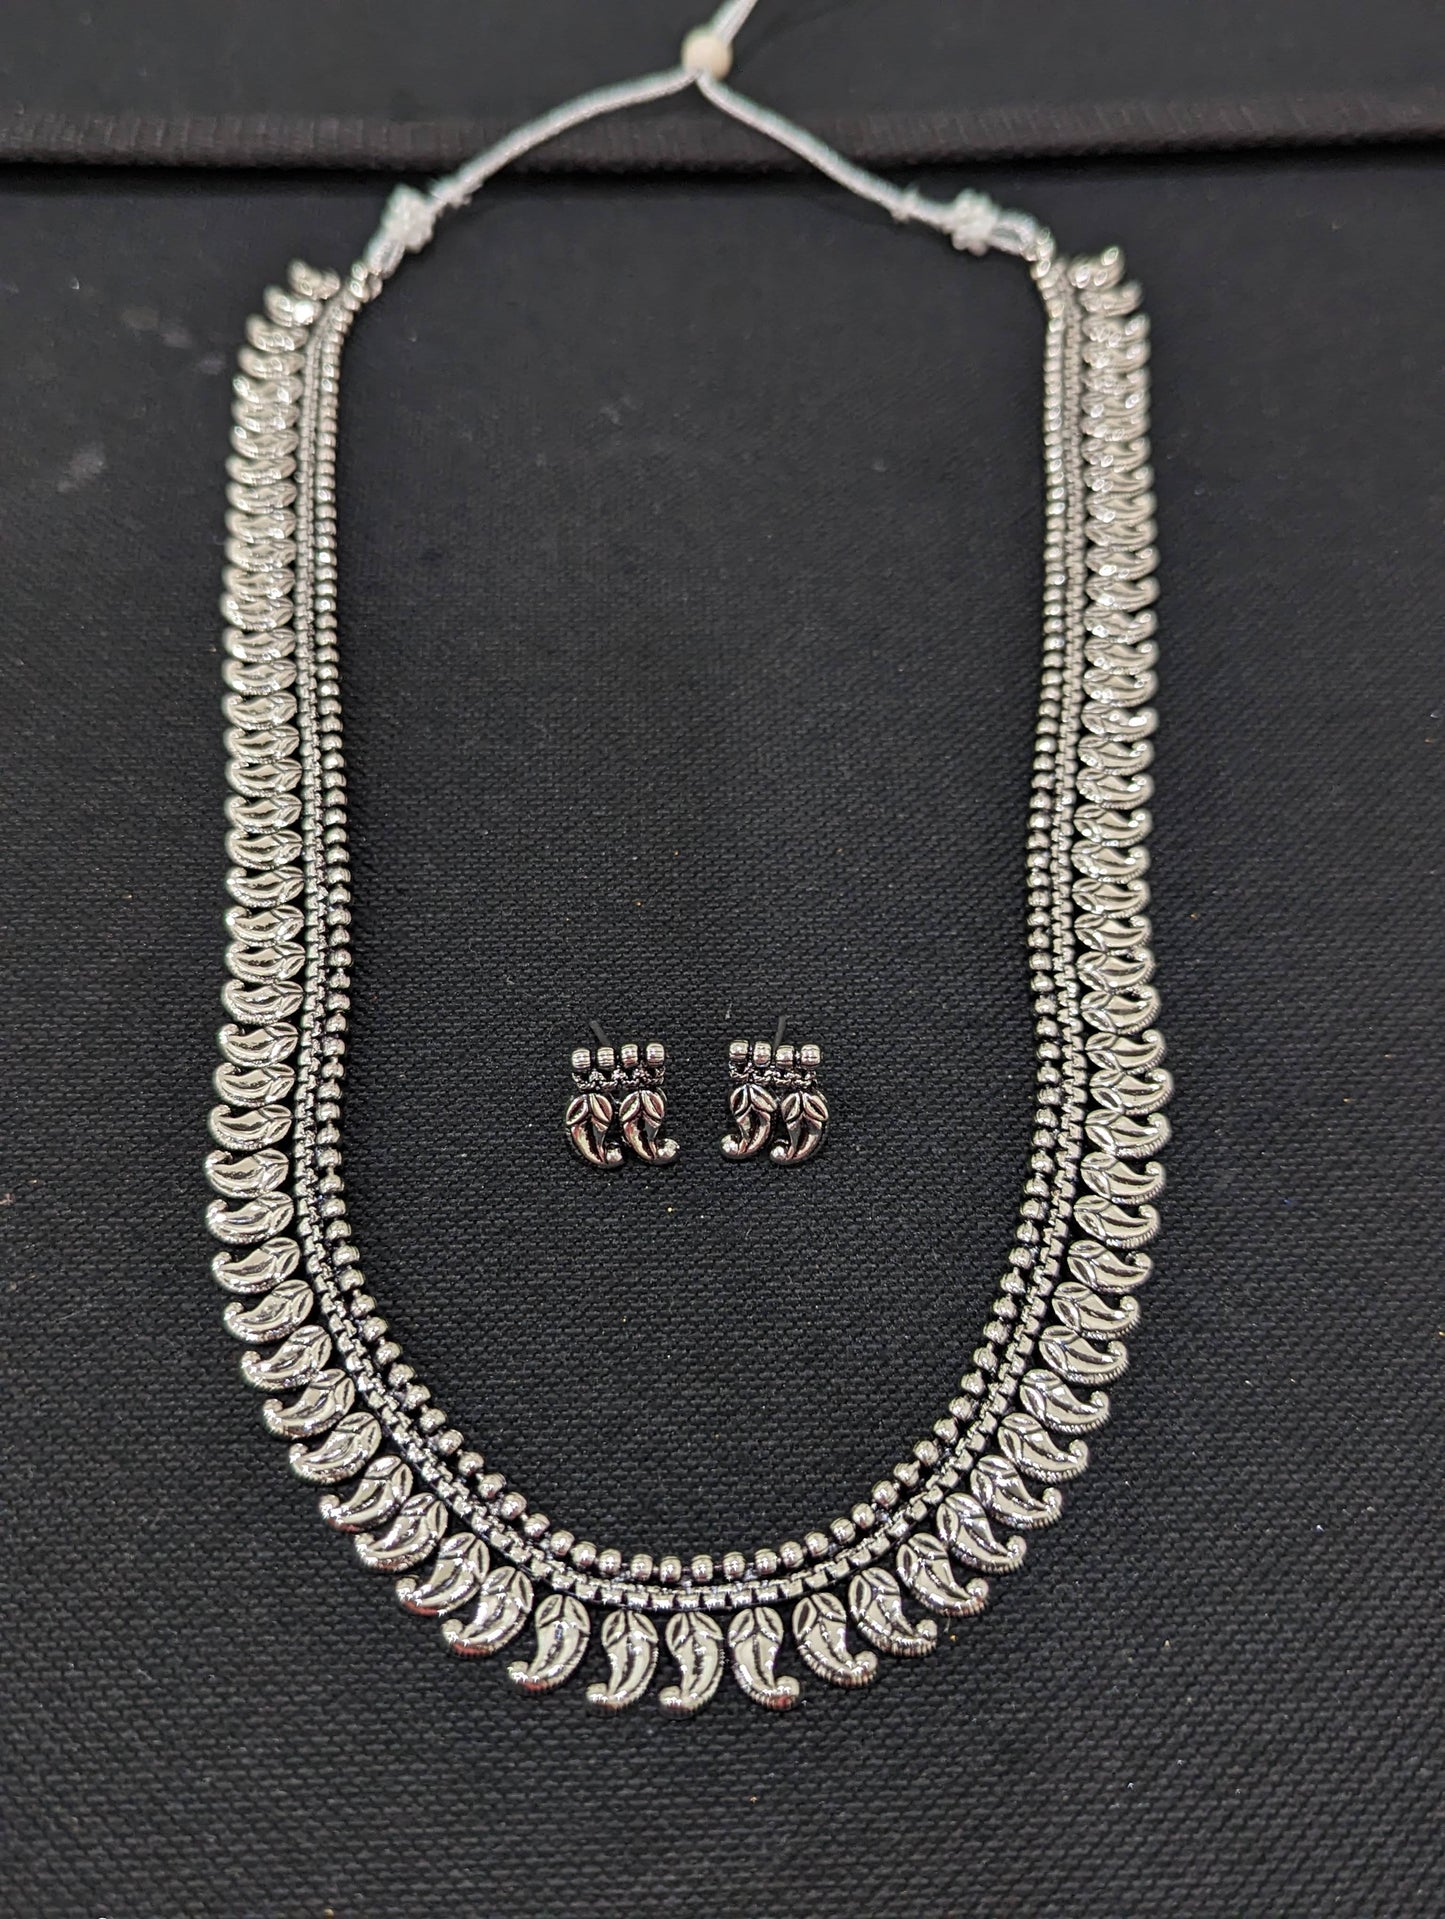 Oxidized silver Mango design necklace and earrings set